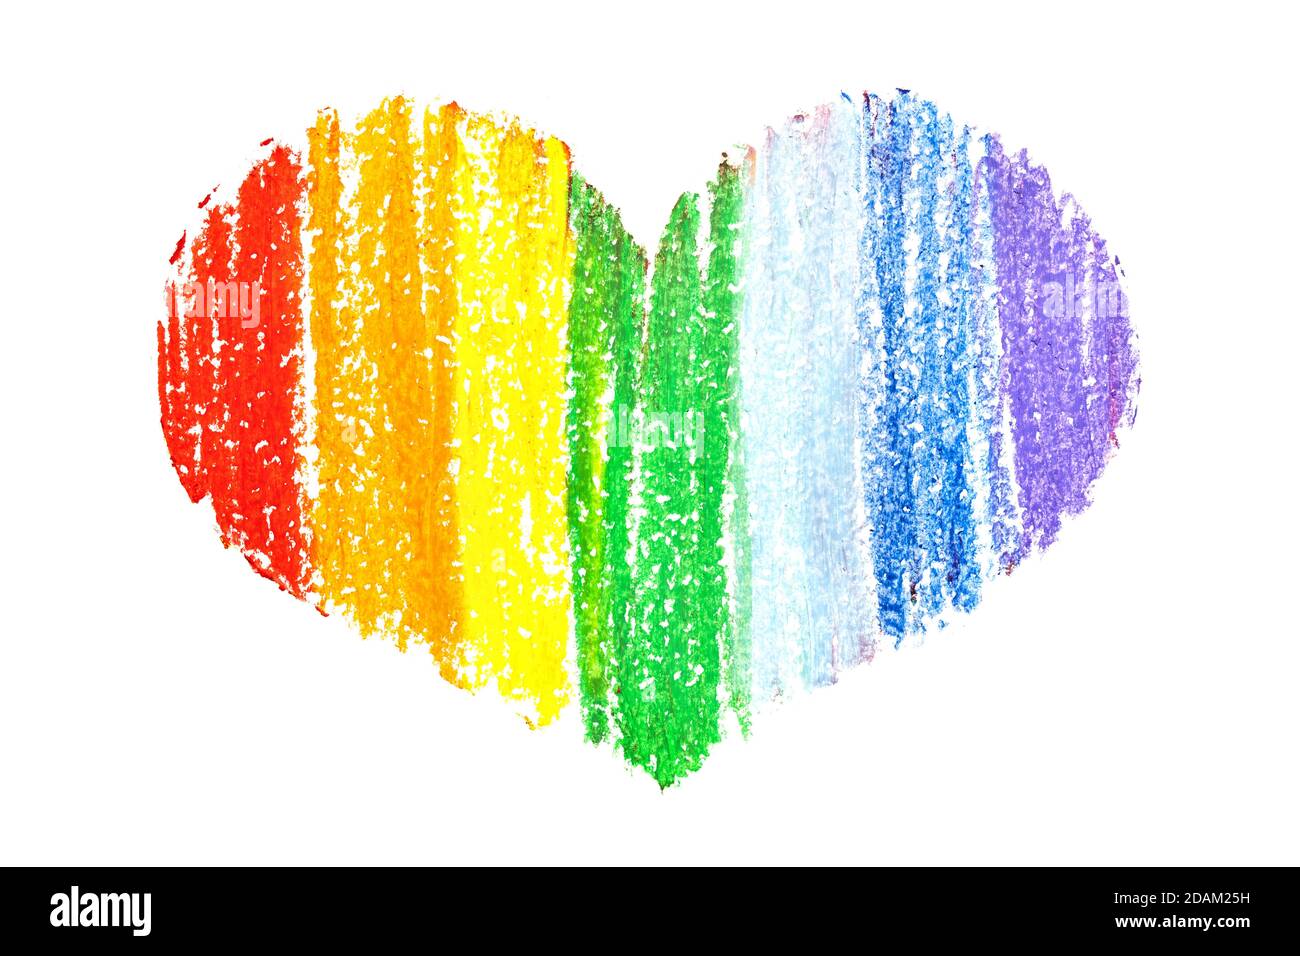 Rainbow heart by crayon isolated on the white background.  Gay pride colors Stock Photo